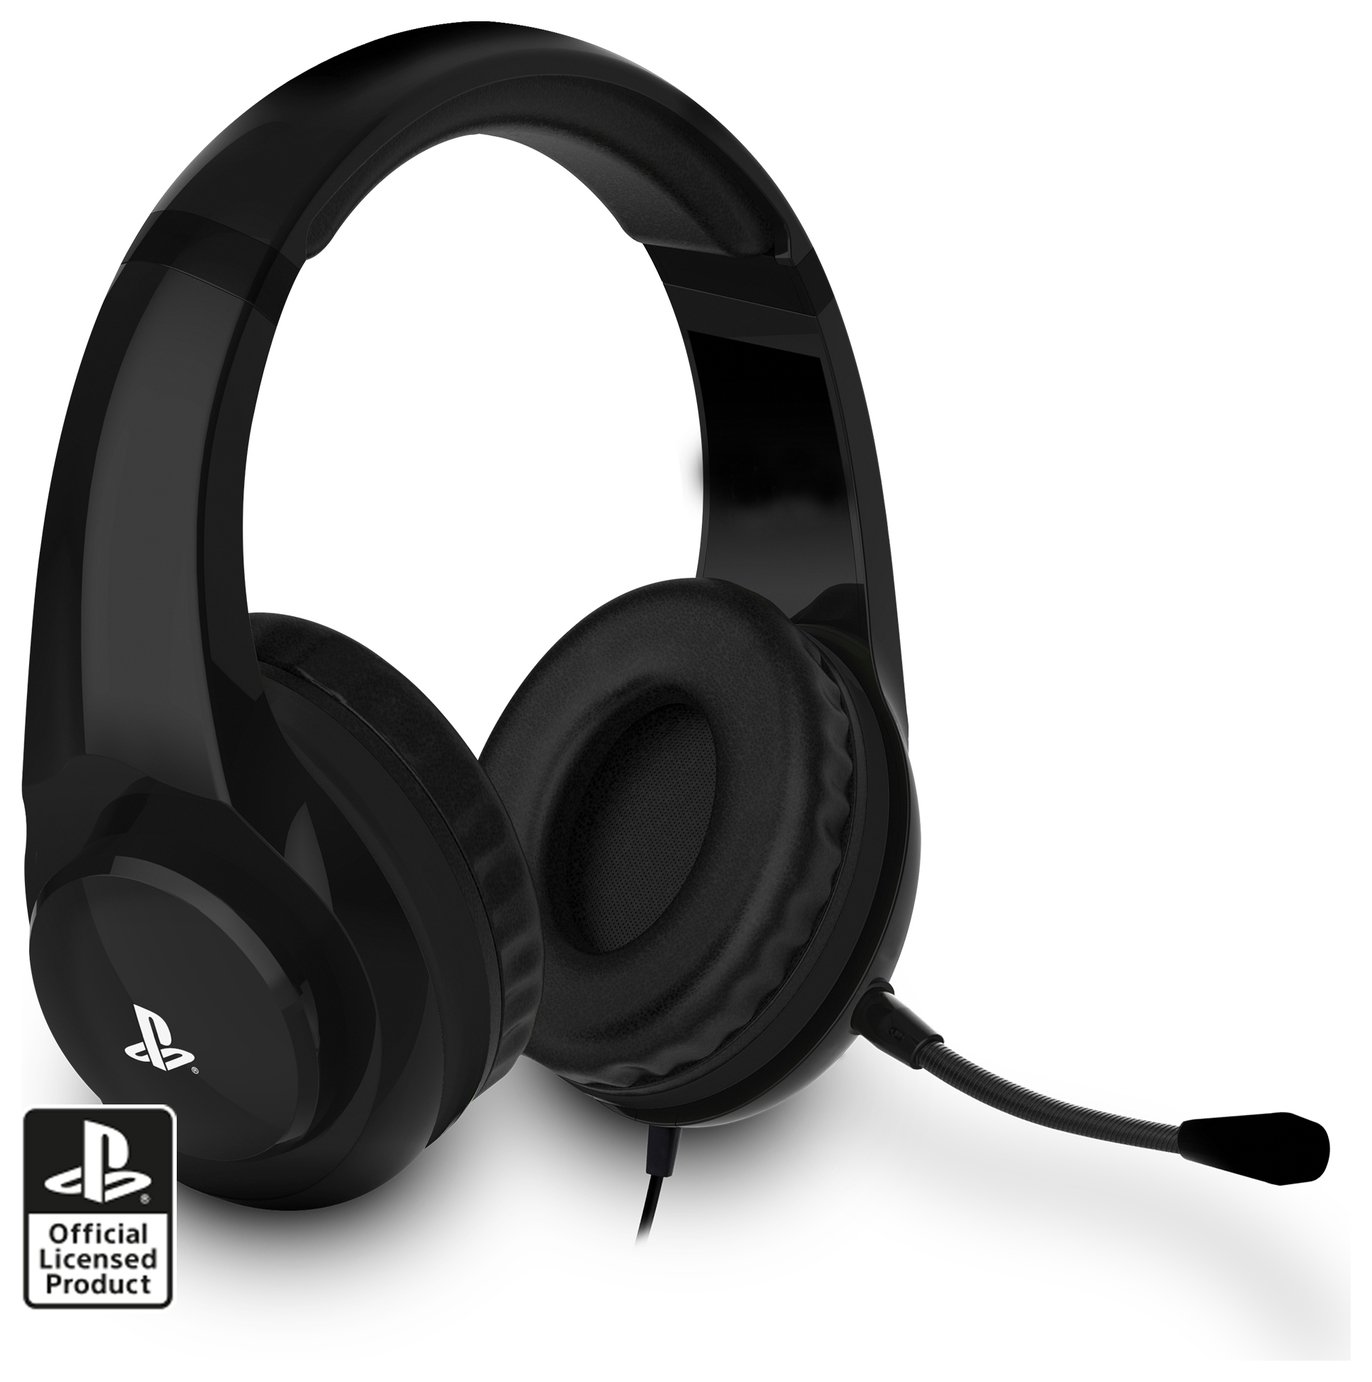 4Gamers PRO4-70 PS4 Headset Review